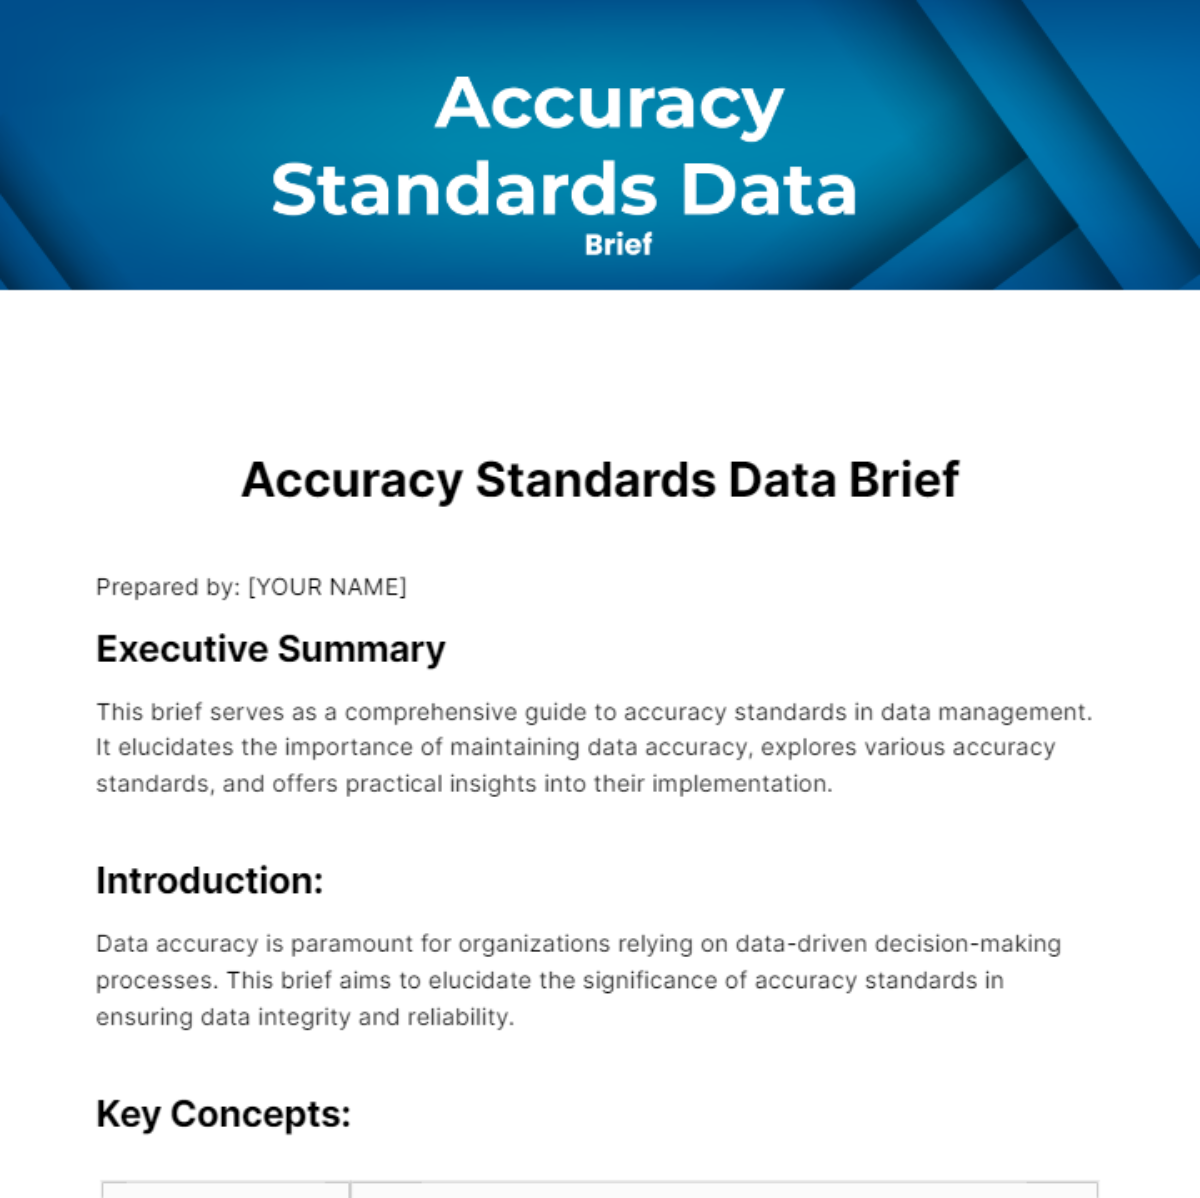 Accuracy Standards Data Brief Template